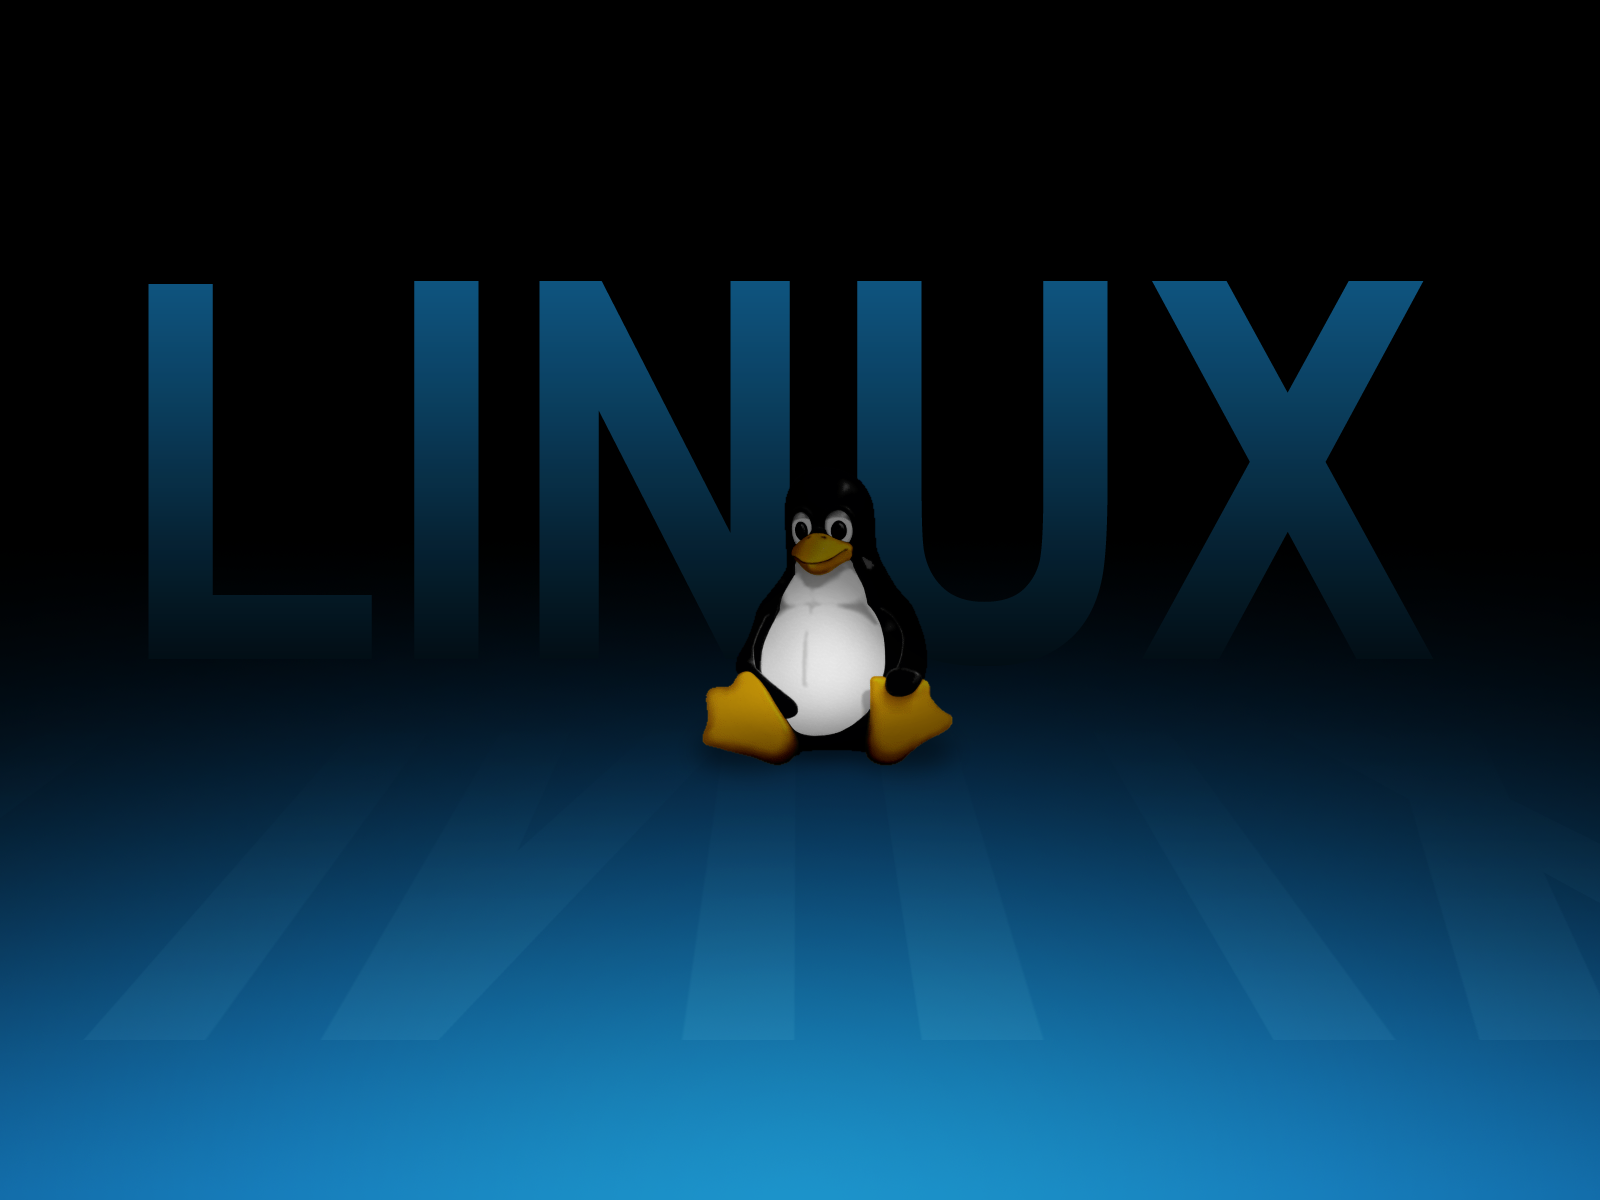 40 Wallpaper Designs Featuring the Linux Mascot Webdesign Core